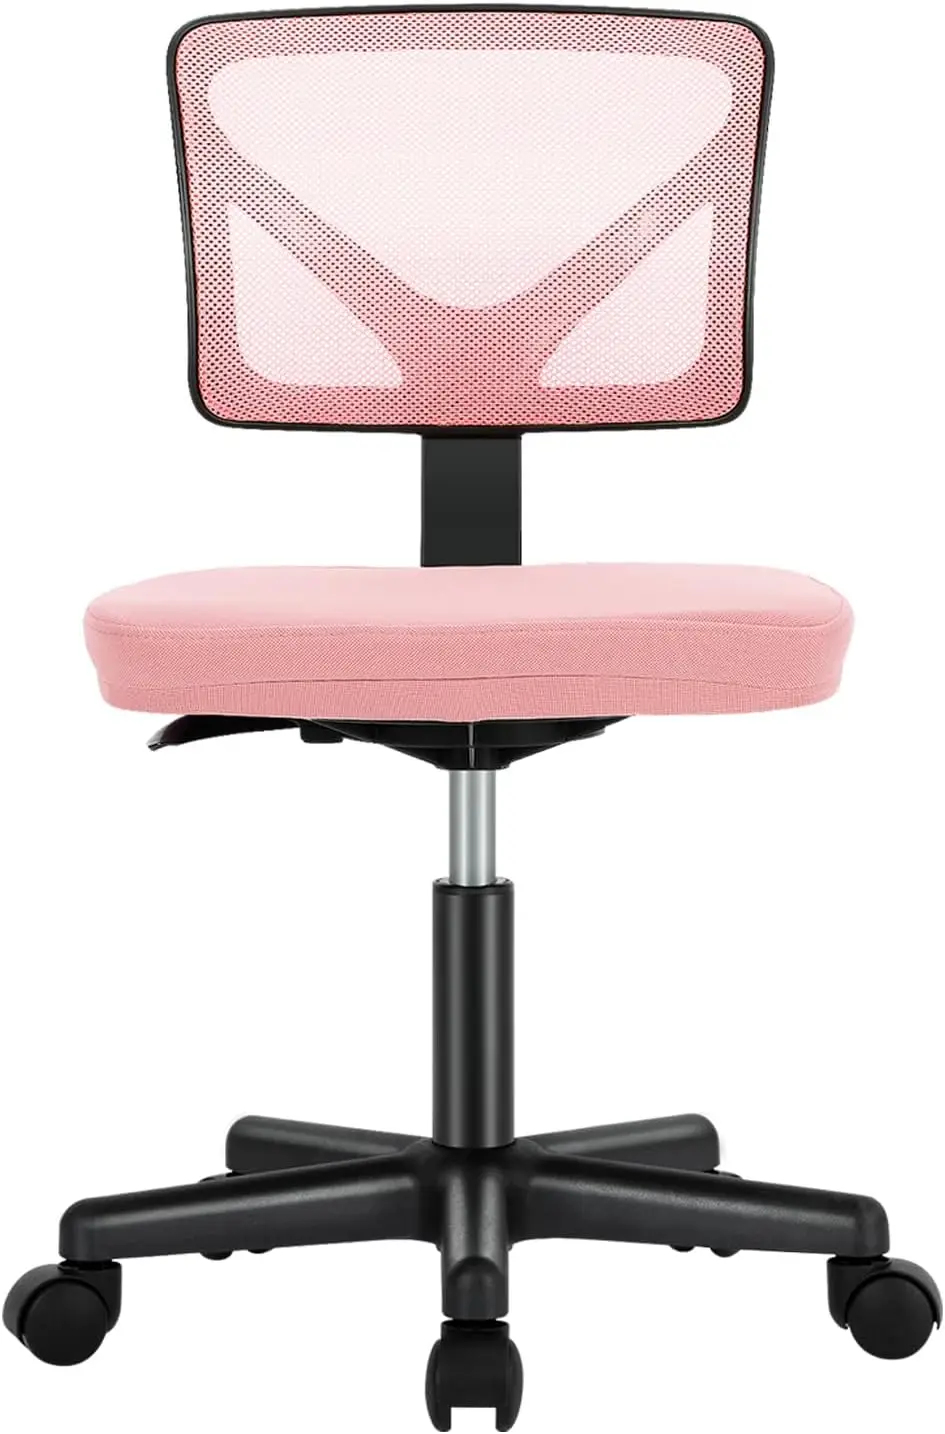 

Armless Desk Chairs, Ergonomic Low Back Computer Chair, Adjustable Rolling Mesh Task Work Swivel Chairs, Pink